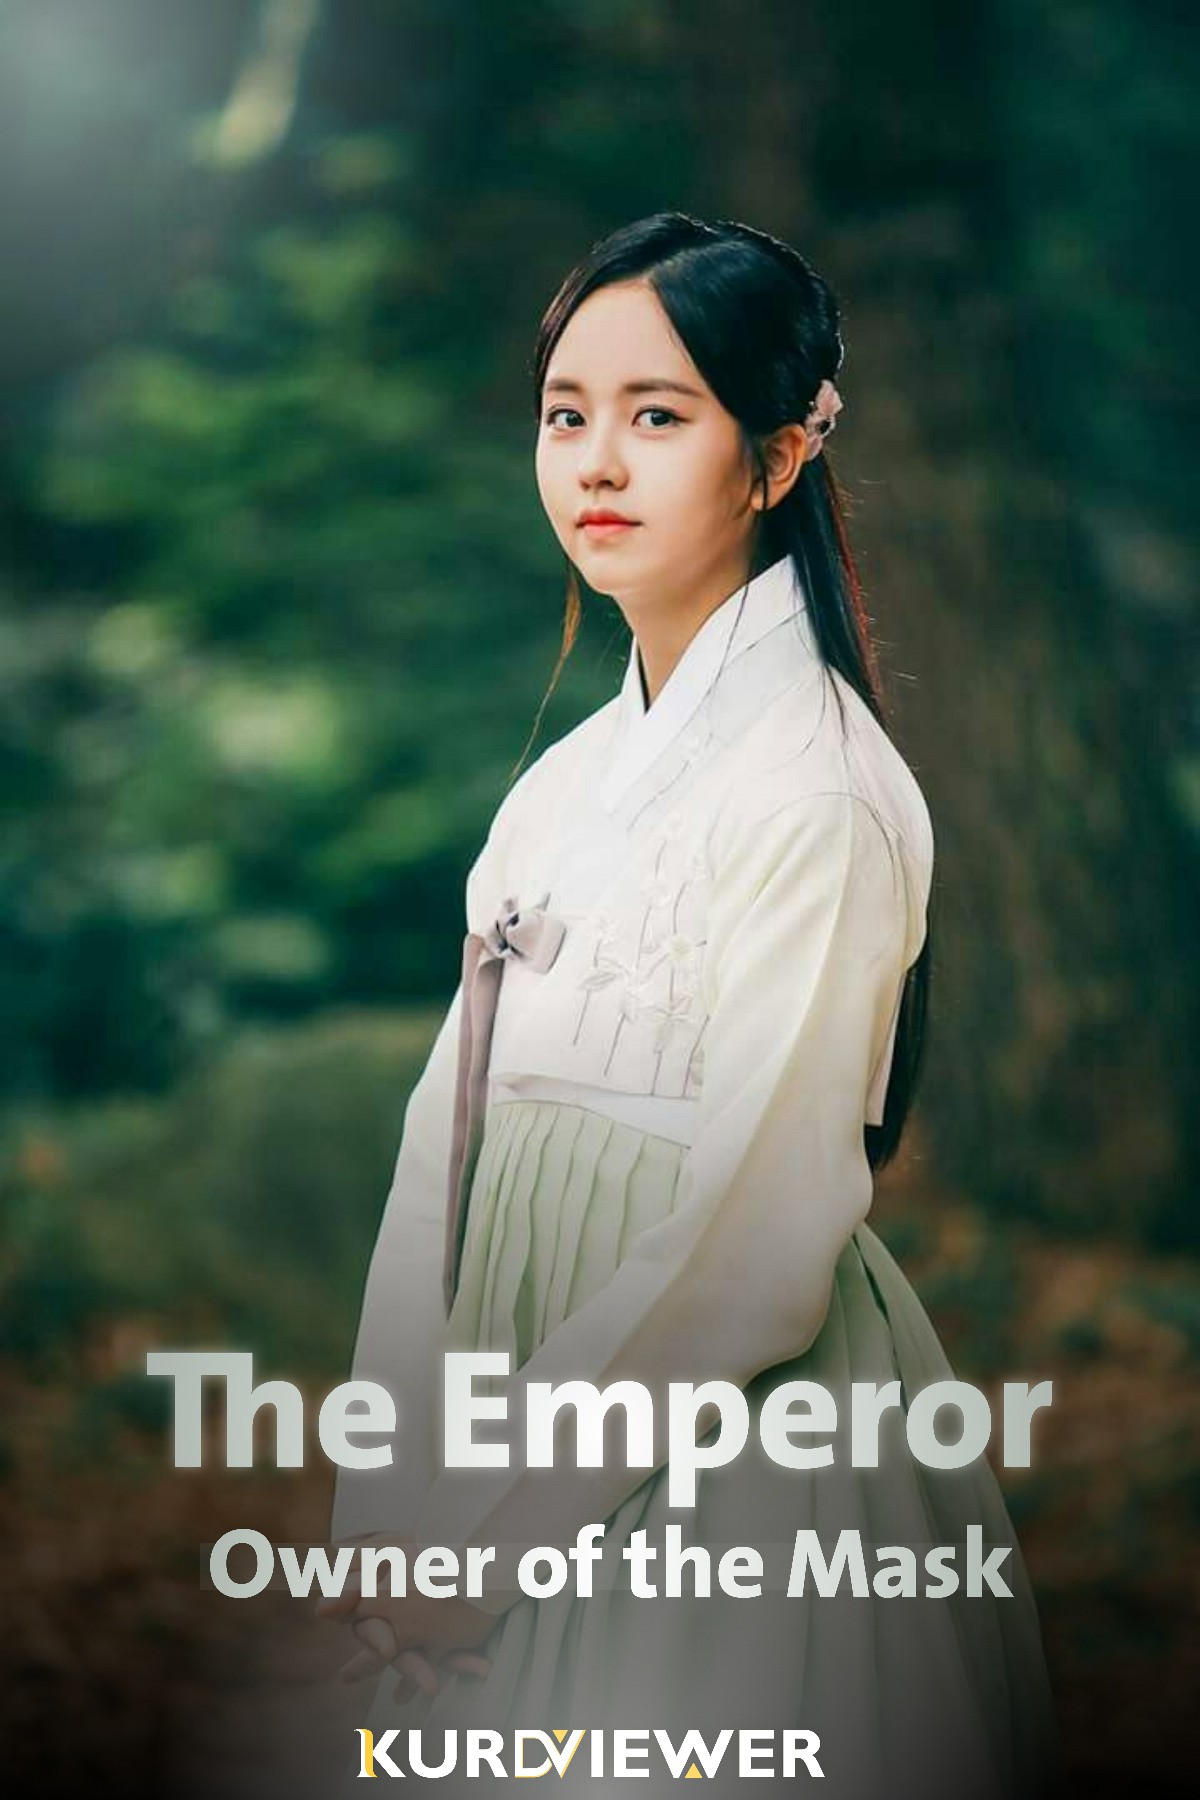 The Emperor: Owner of the Mask (2017)